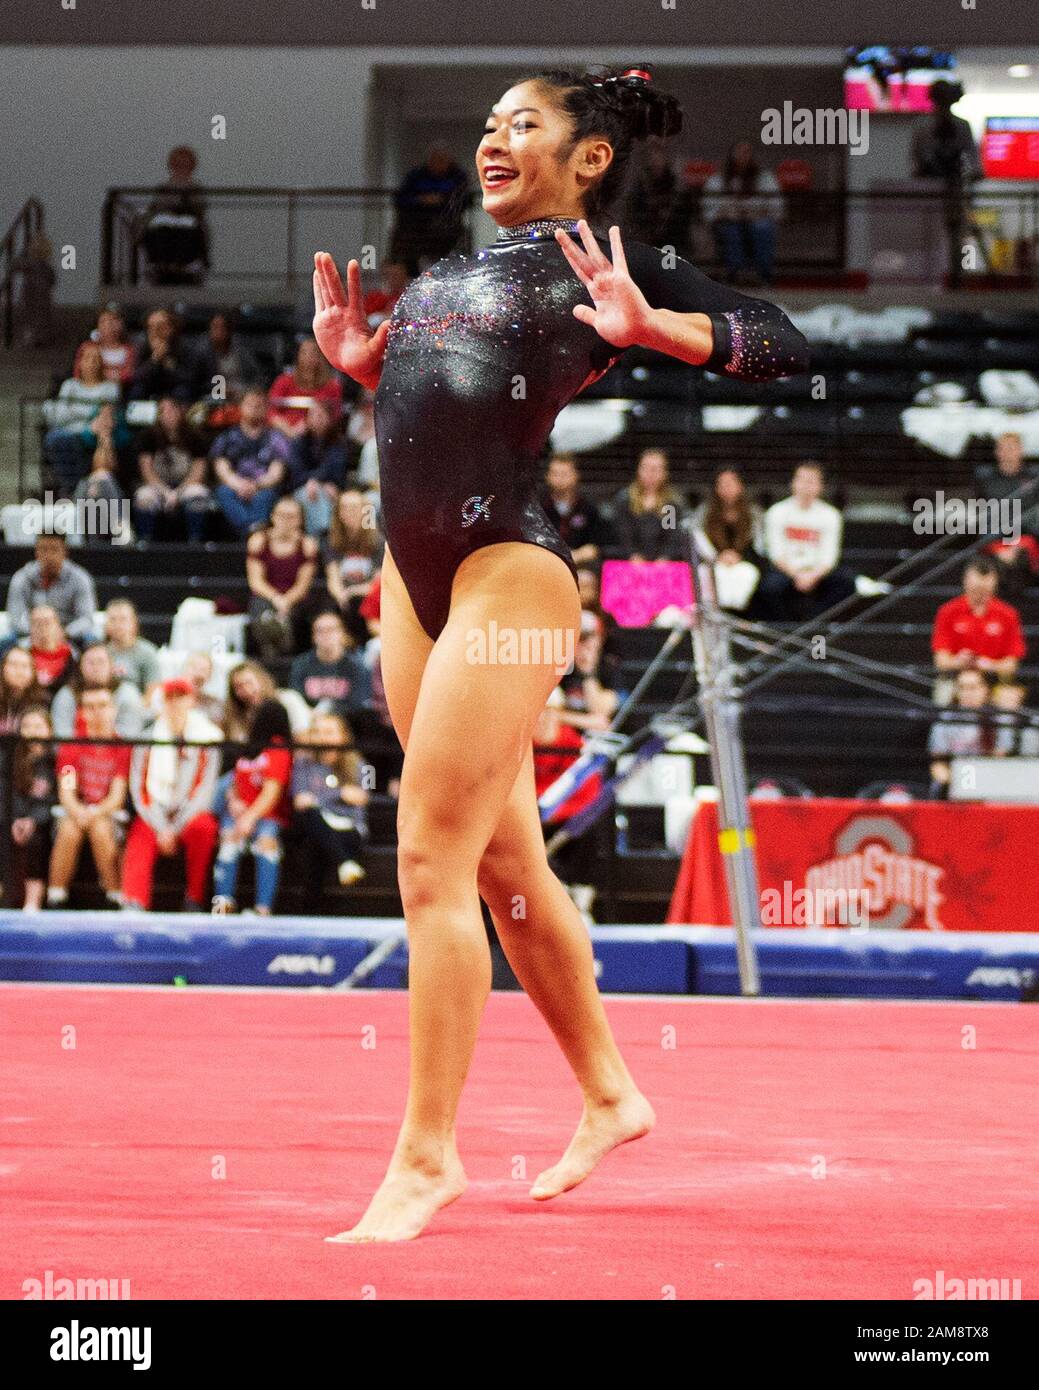 Columbus, Ohio, USA. 11th Jan, 2020. Ohio State Buckeyes Danica Abanto (1) competes in the floor exersise against the North Carolina State Wolfpack in their meet in Columbus, Ohio. Brent Clark/CSM/Alamy Live News Stock Photo